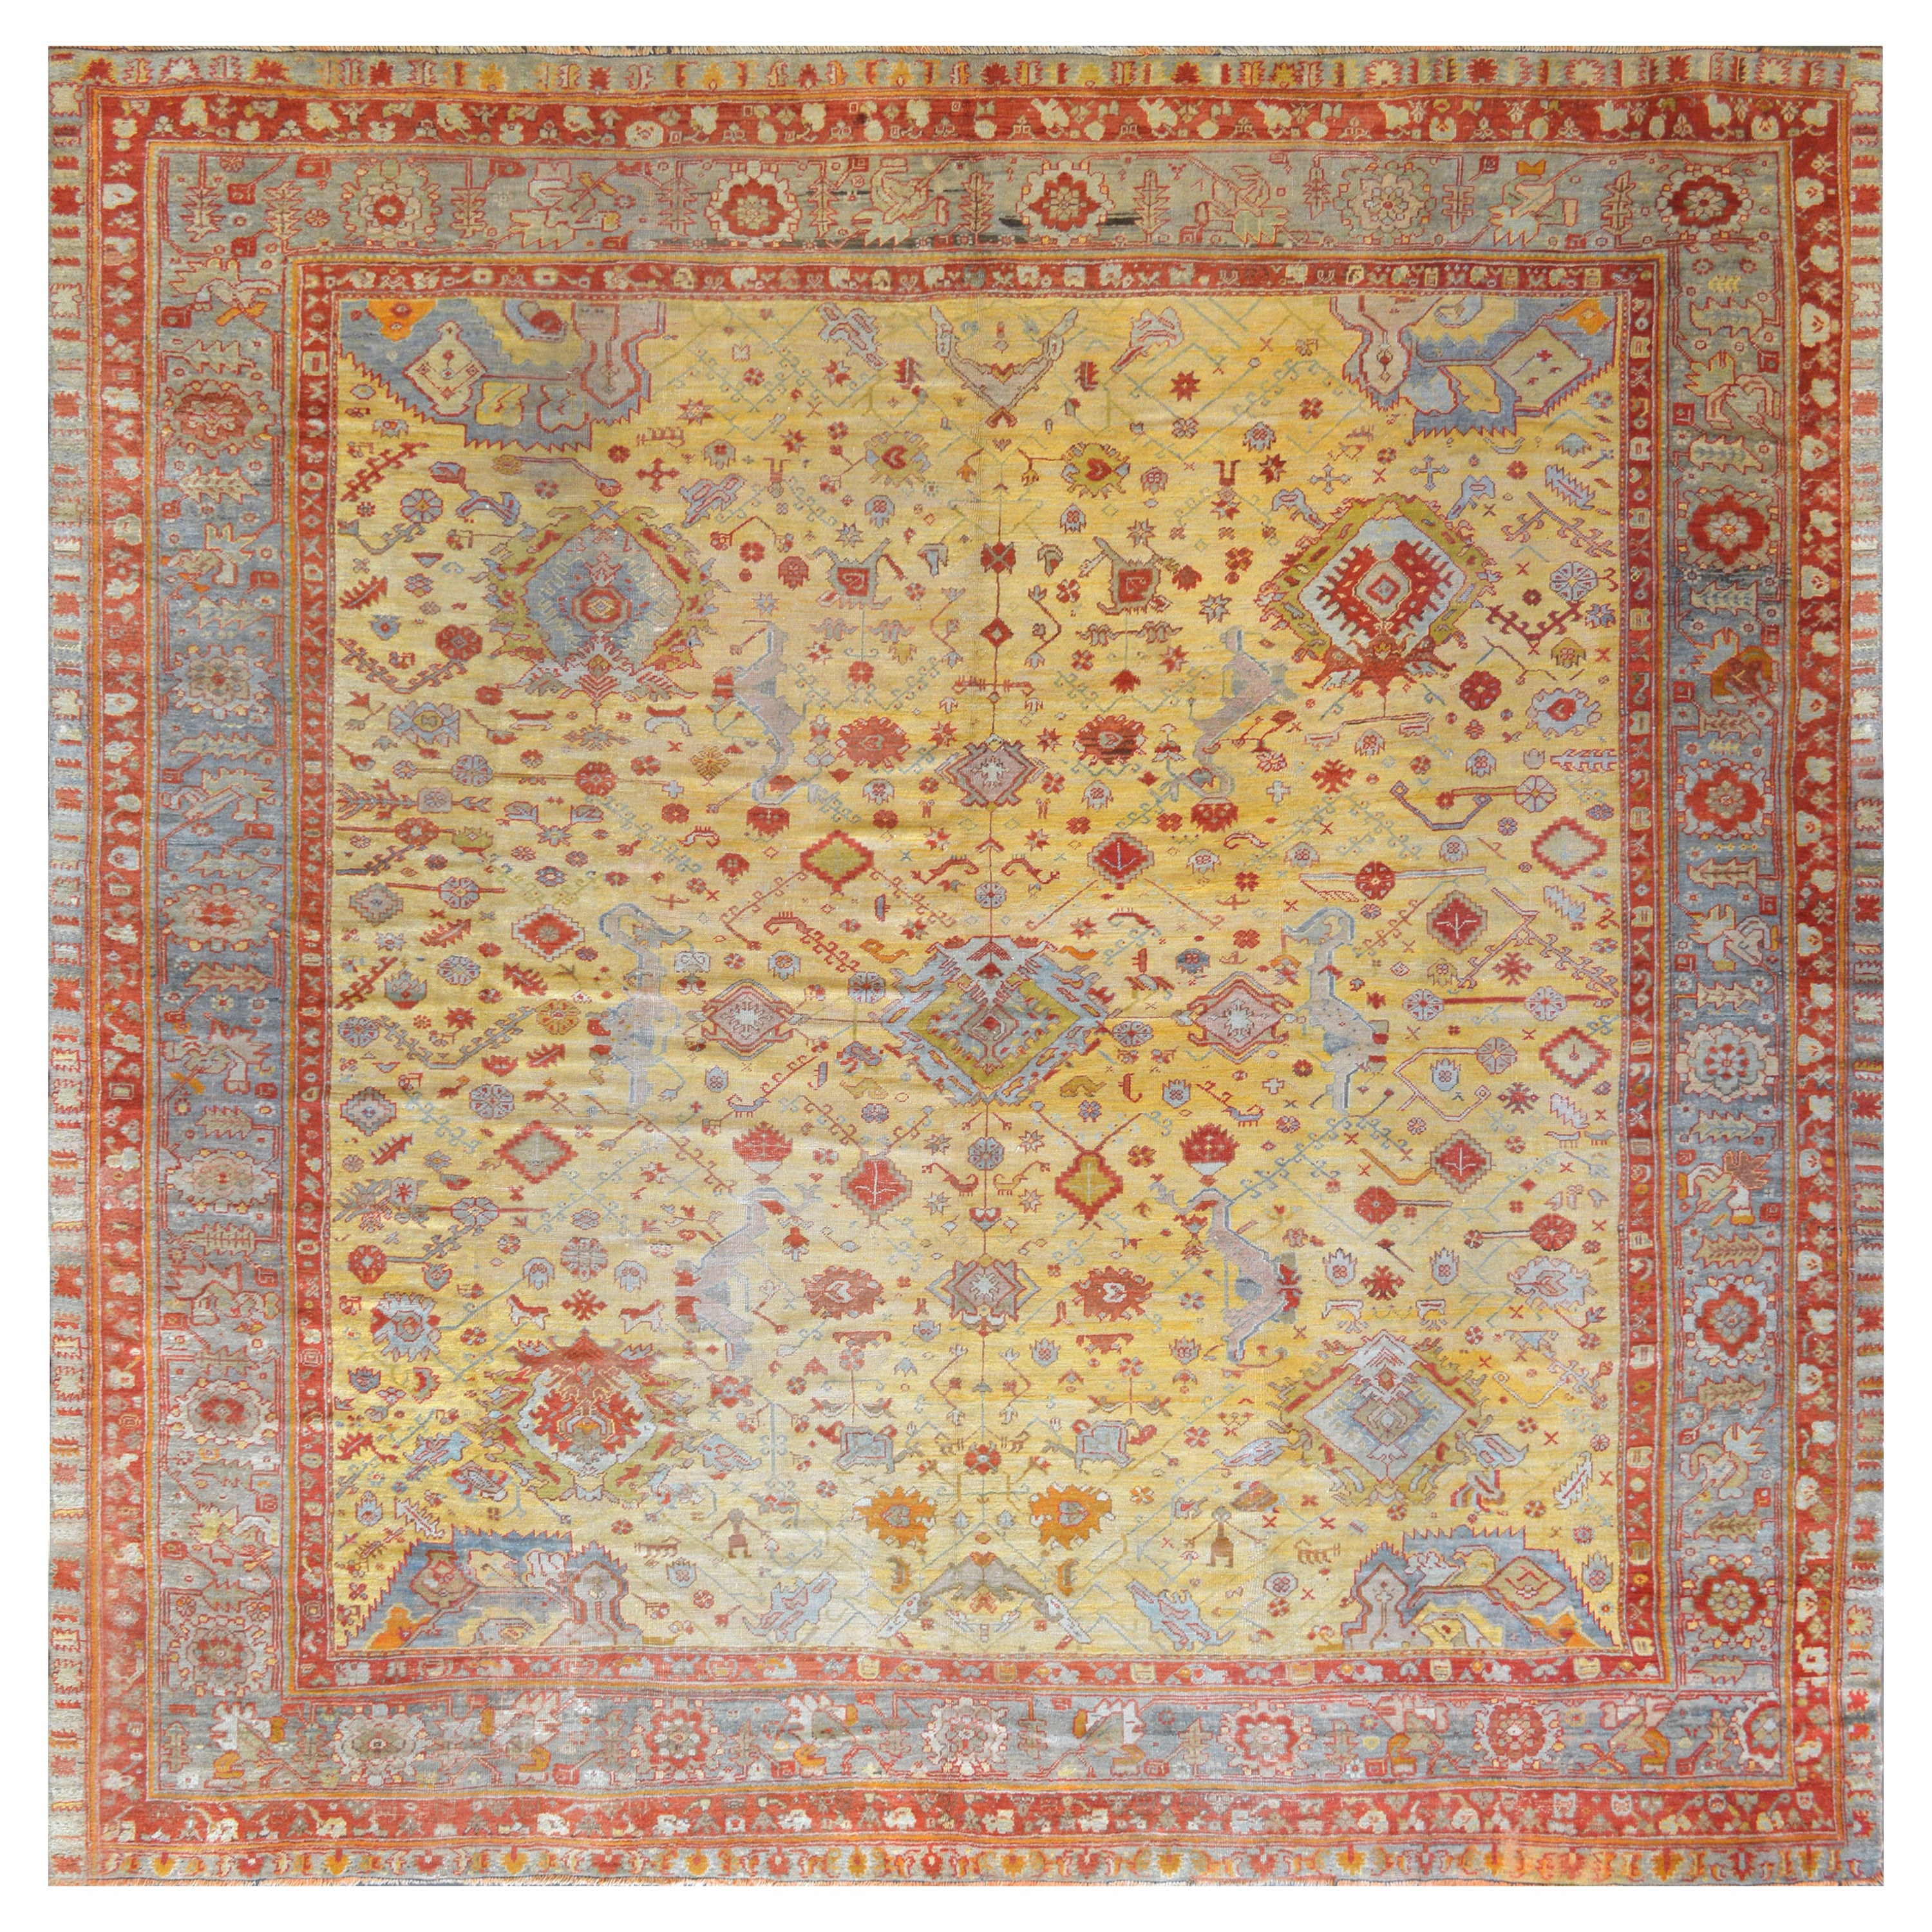 Late 19th Century Antique Handwoven Square Oushak Rug